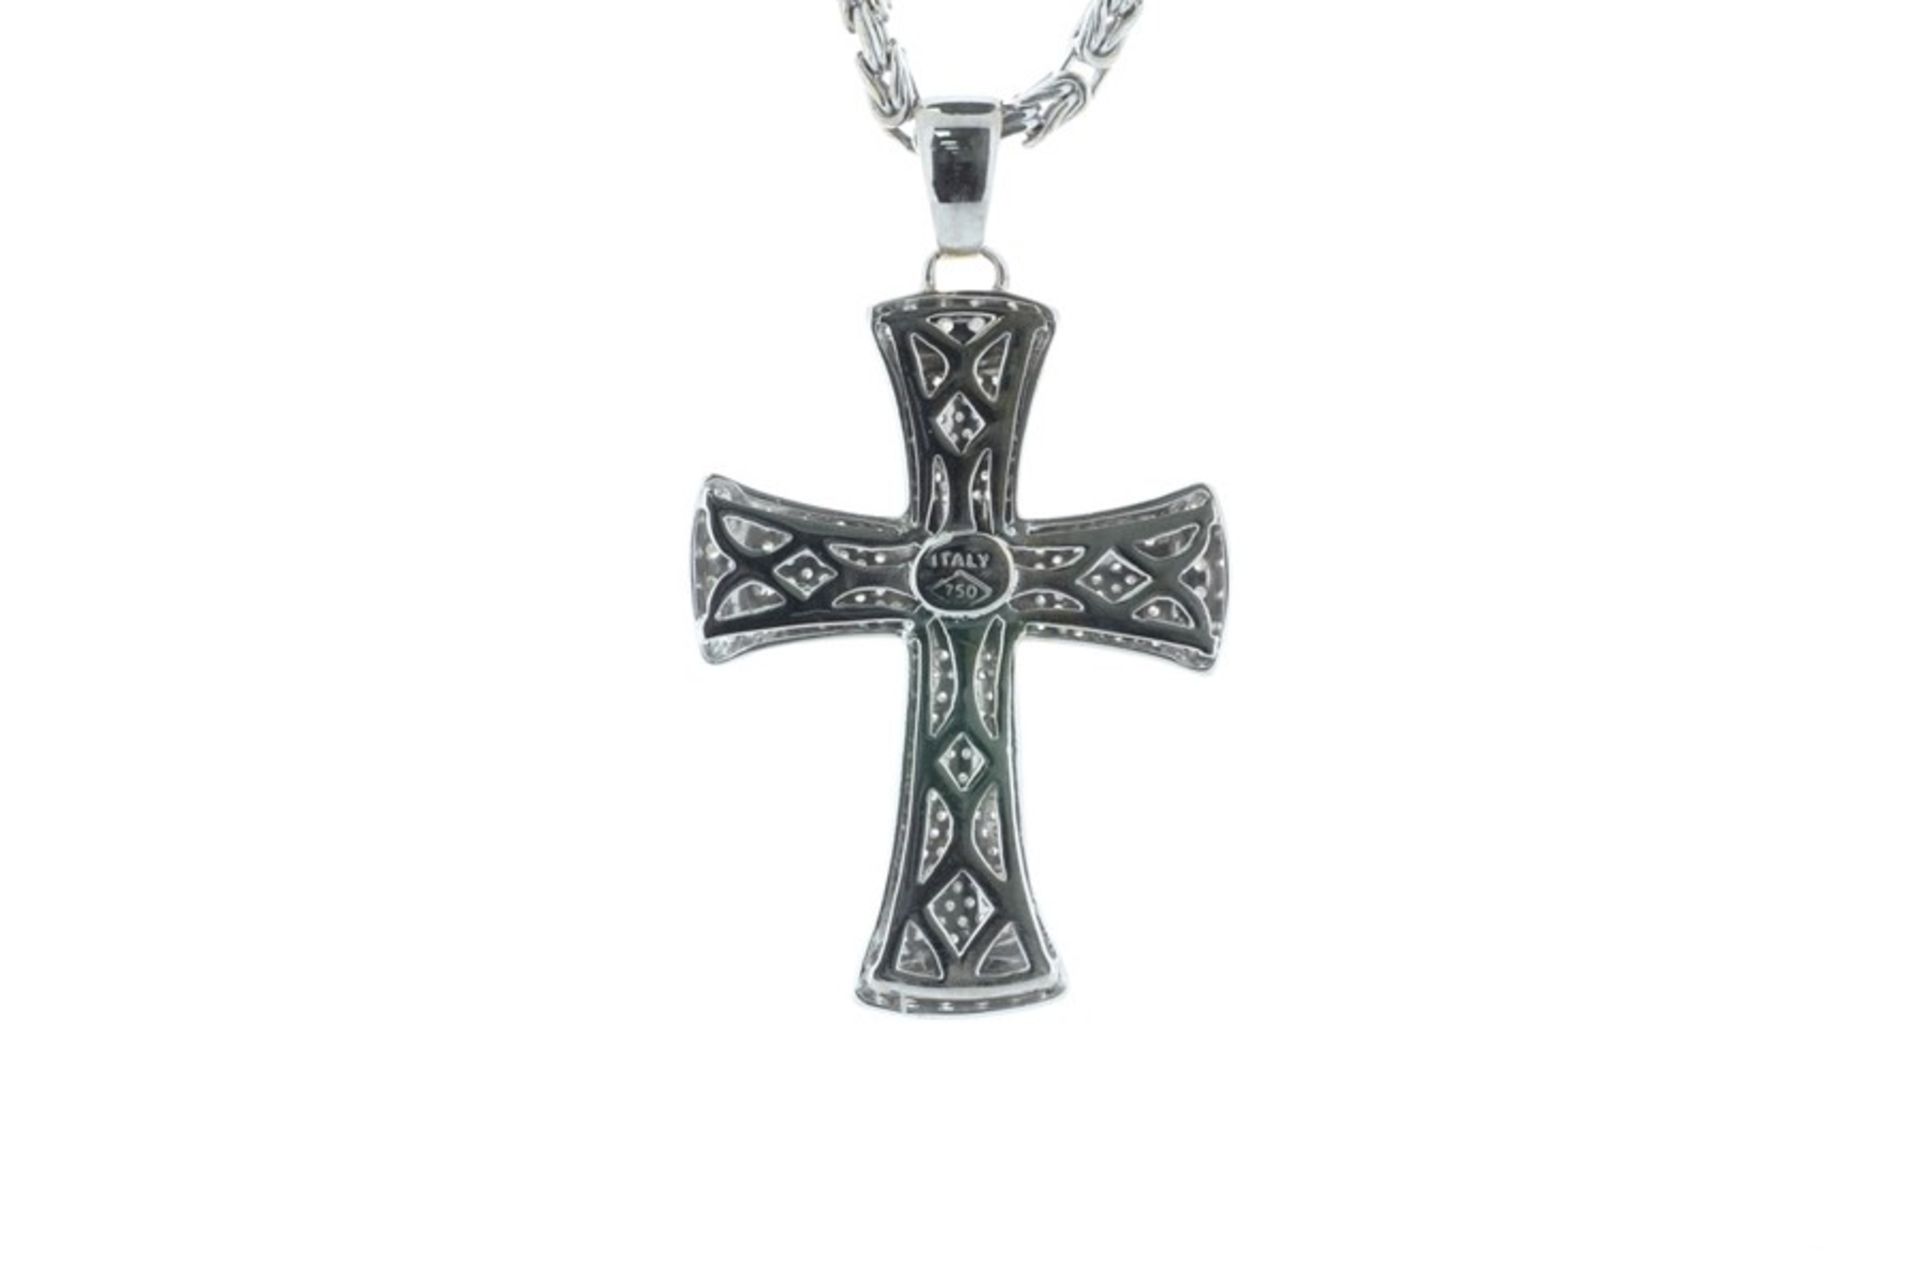 18ct White Gold Diamond Cross Pendant/Chain Valued by AGI £23,810.00 - Image 4 of 4